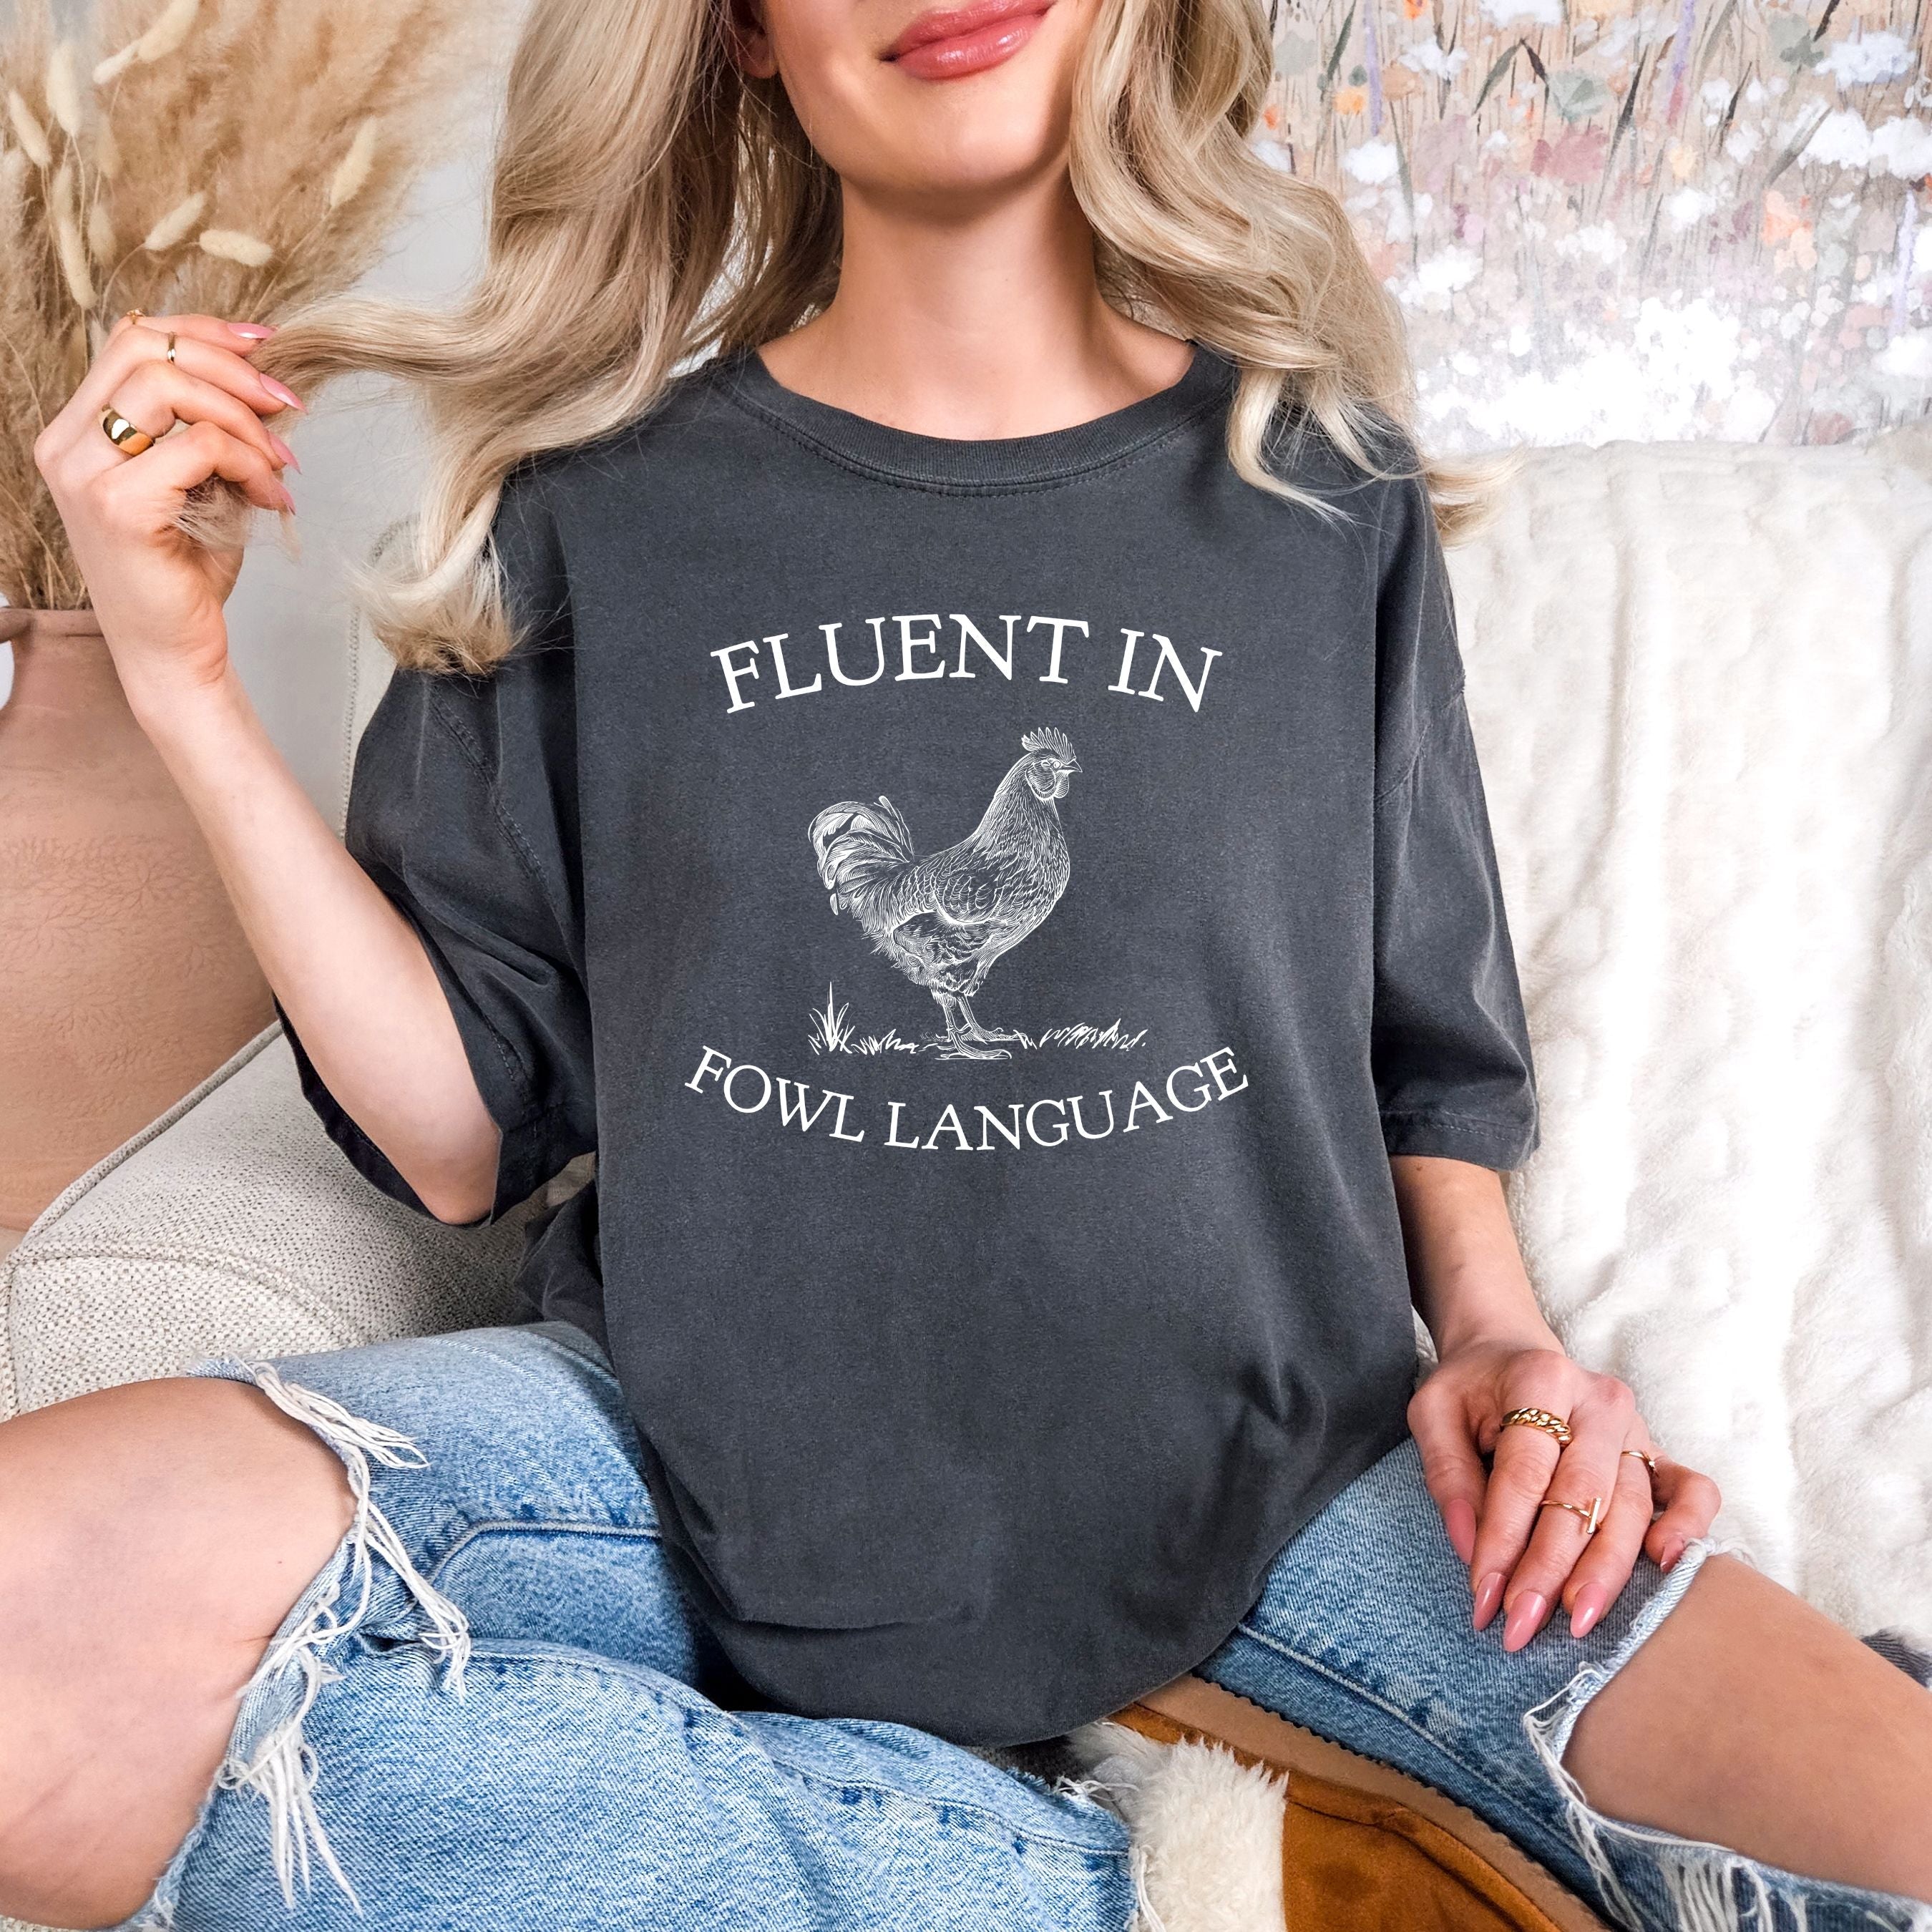 PREORDER: Fluent in Fowl Language Graphic Tee (Ships Late May)